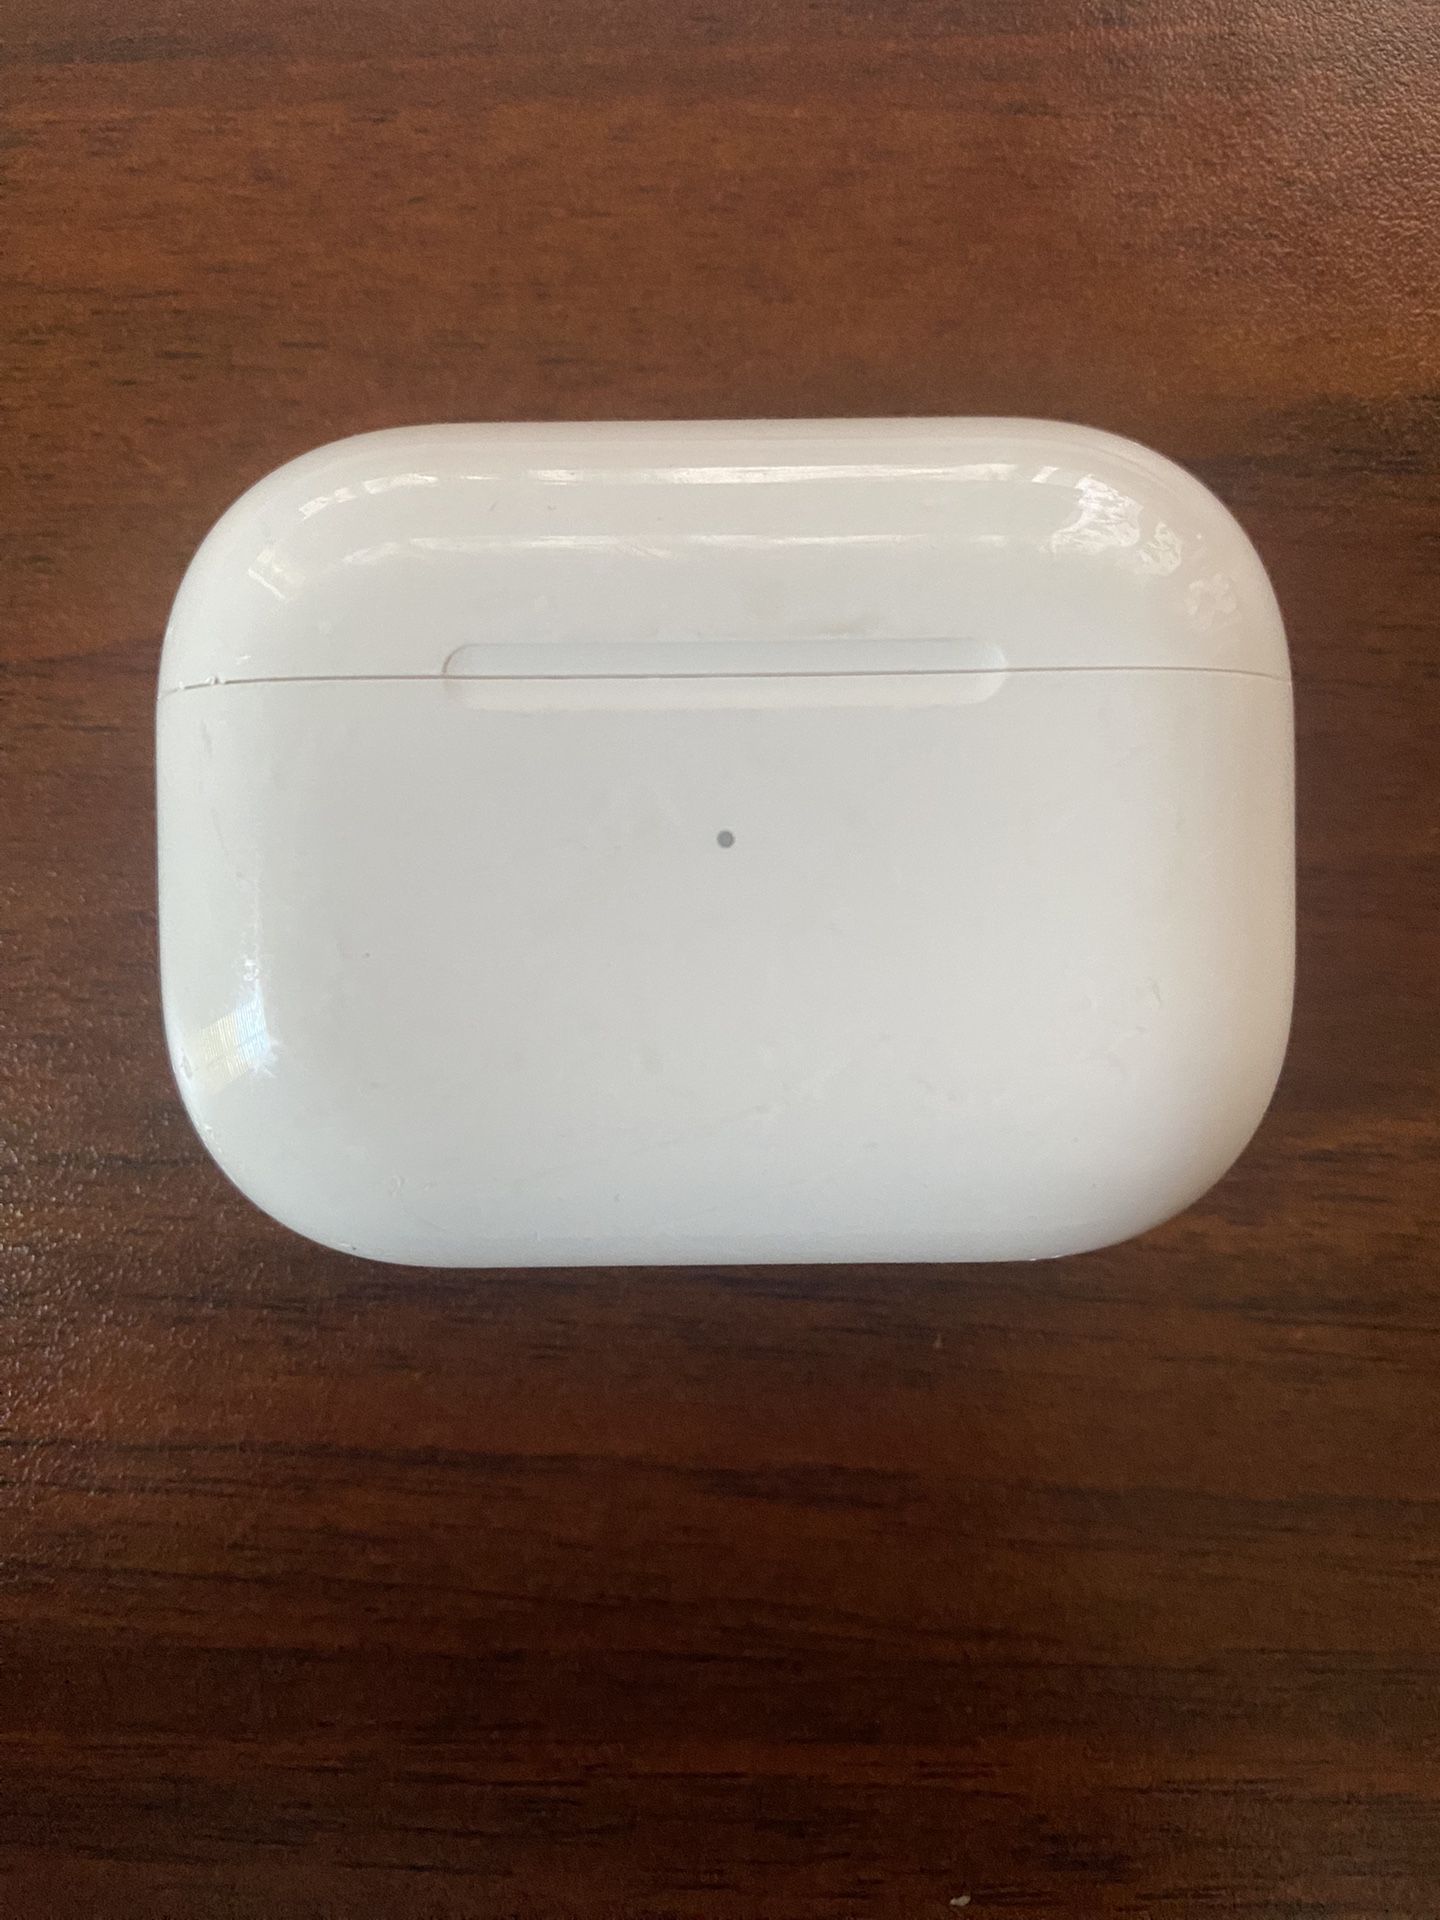 Airpod Pro Gen 1 (Left airpod and Case only)